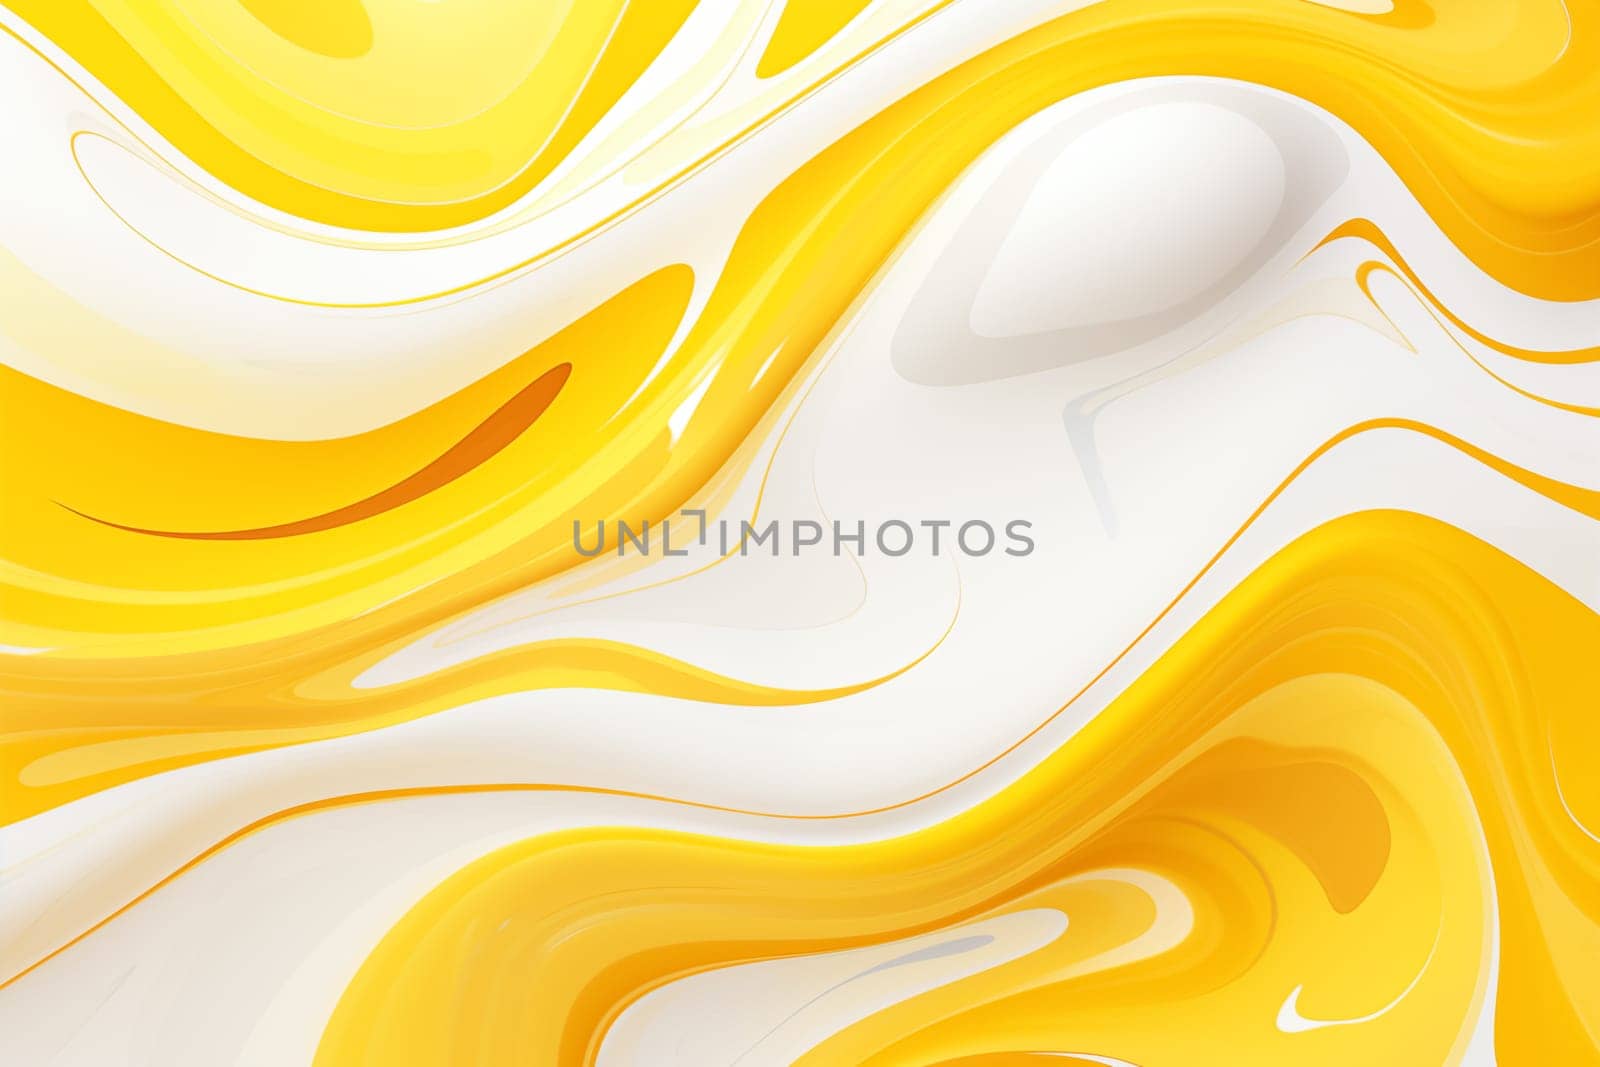 White and yellow fluid shapes abstract background by Nadtochiy